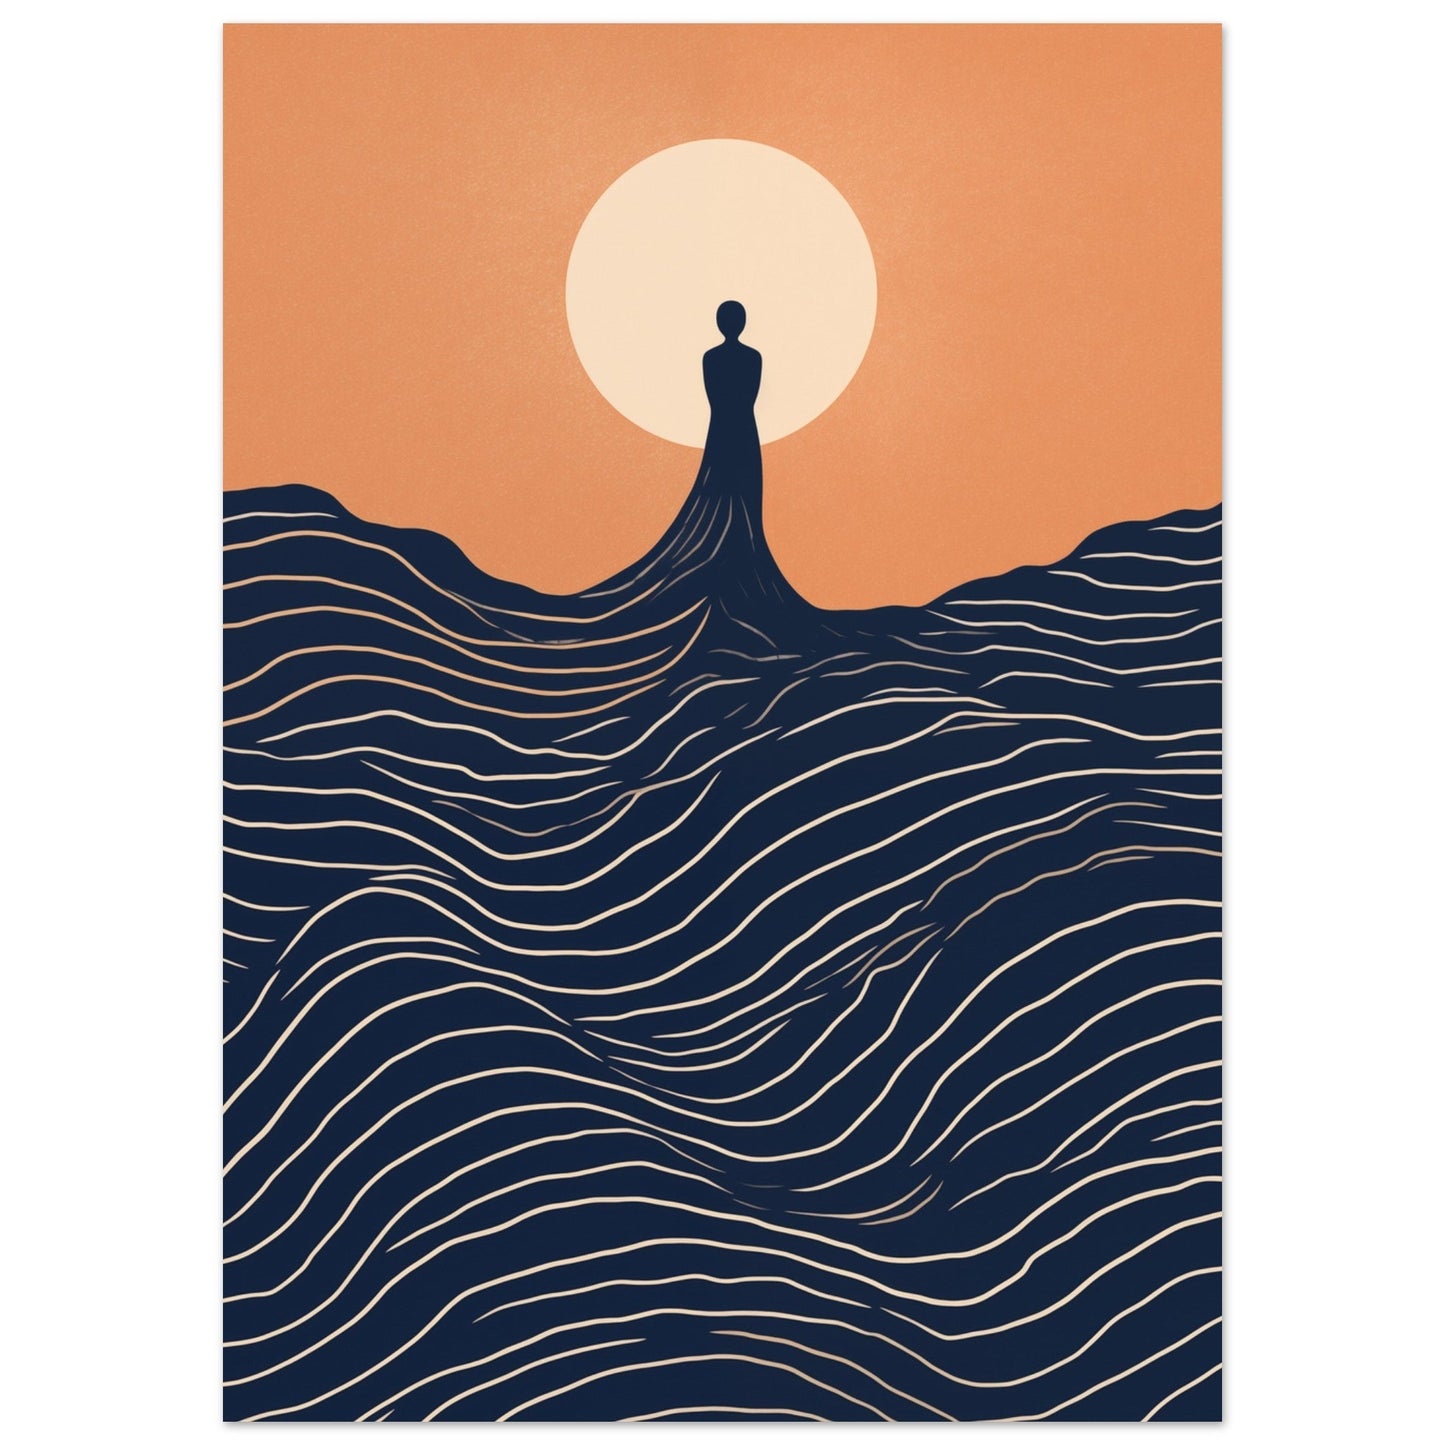 A stunning Eclipse Enigma colored poster featuring a graceful silhouette of a woman standing on a wave at sunset. Perfect for adding an artistic touch to any room decor.